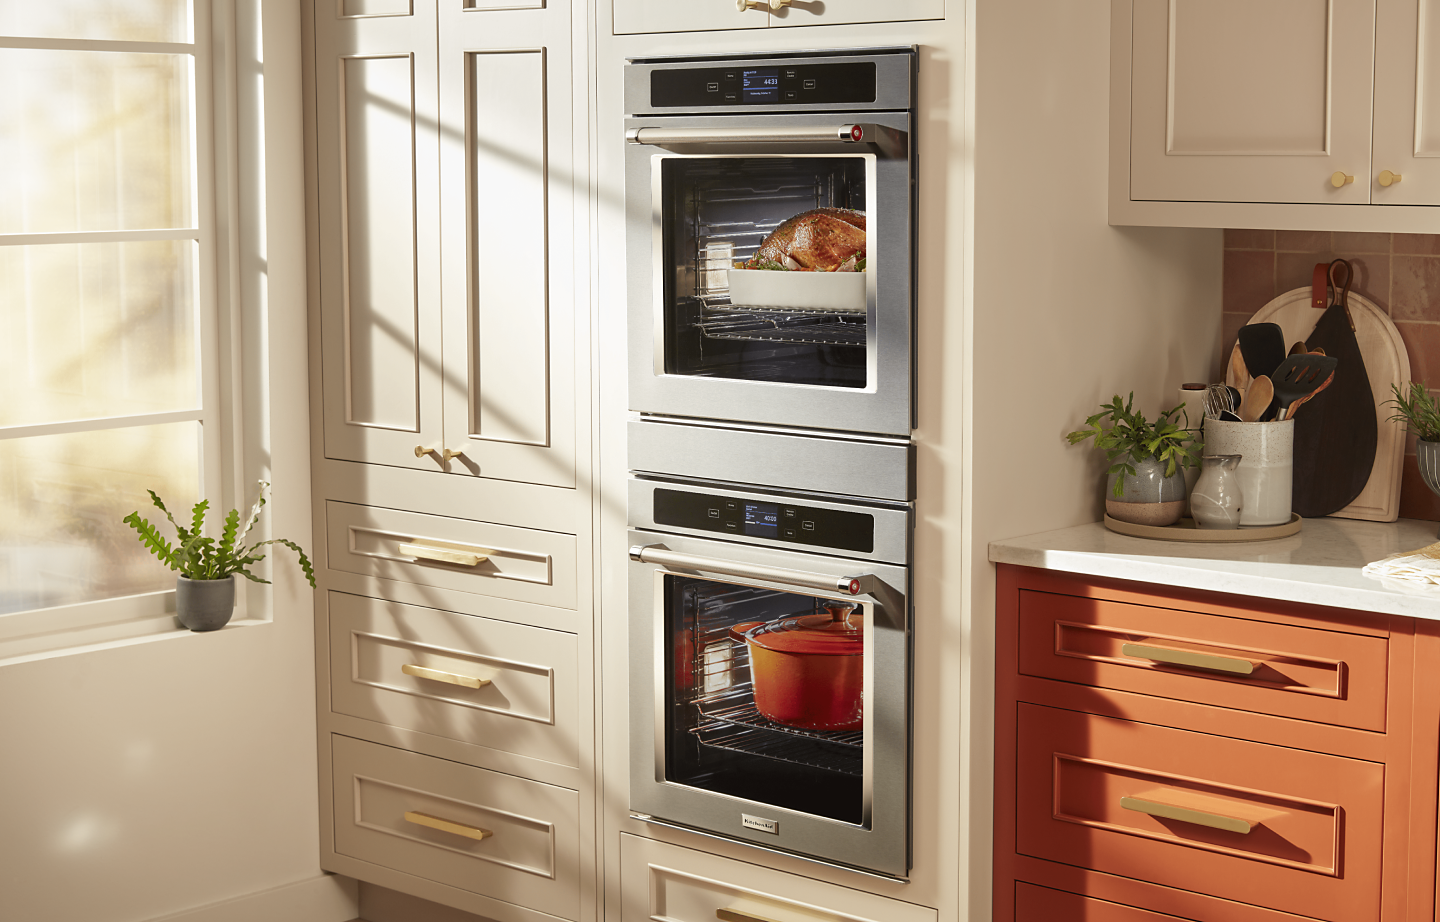 KitchenAid® stainless steel double wall oven